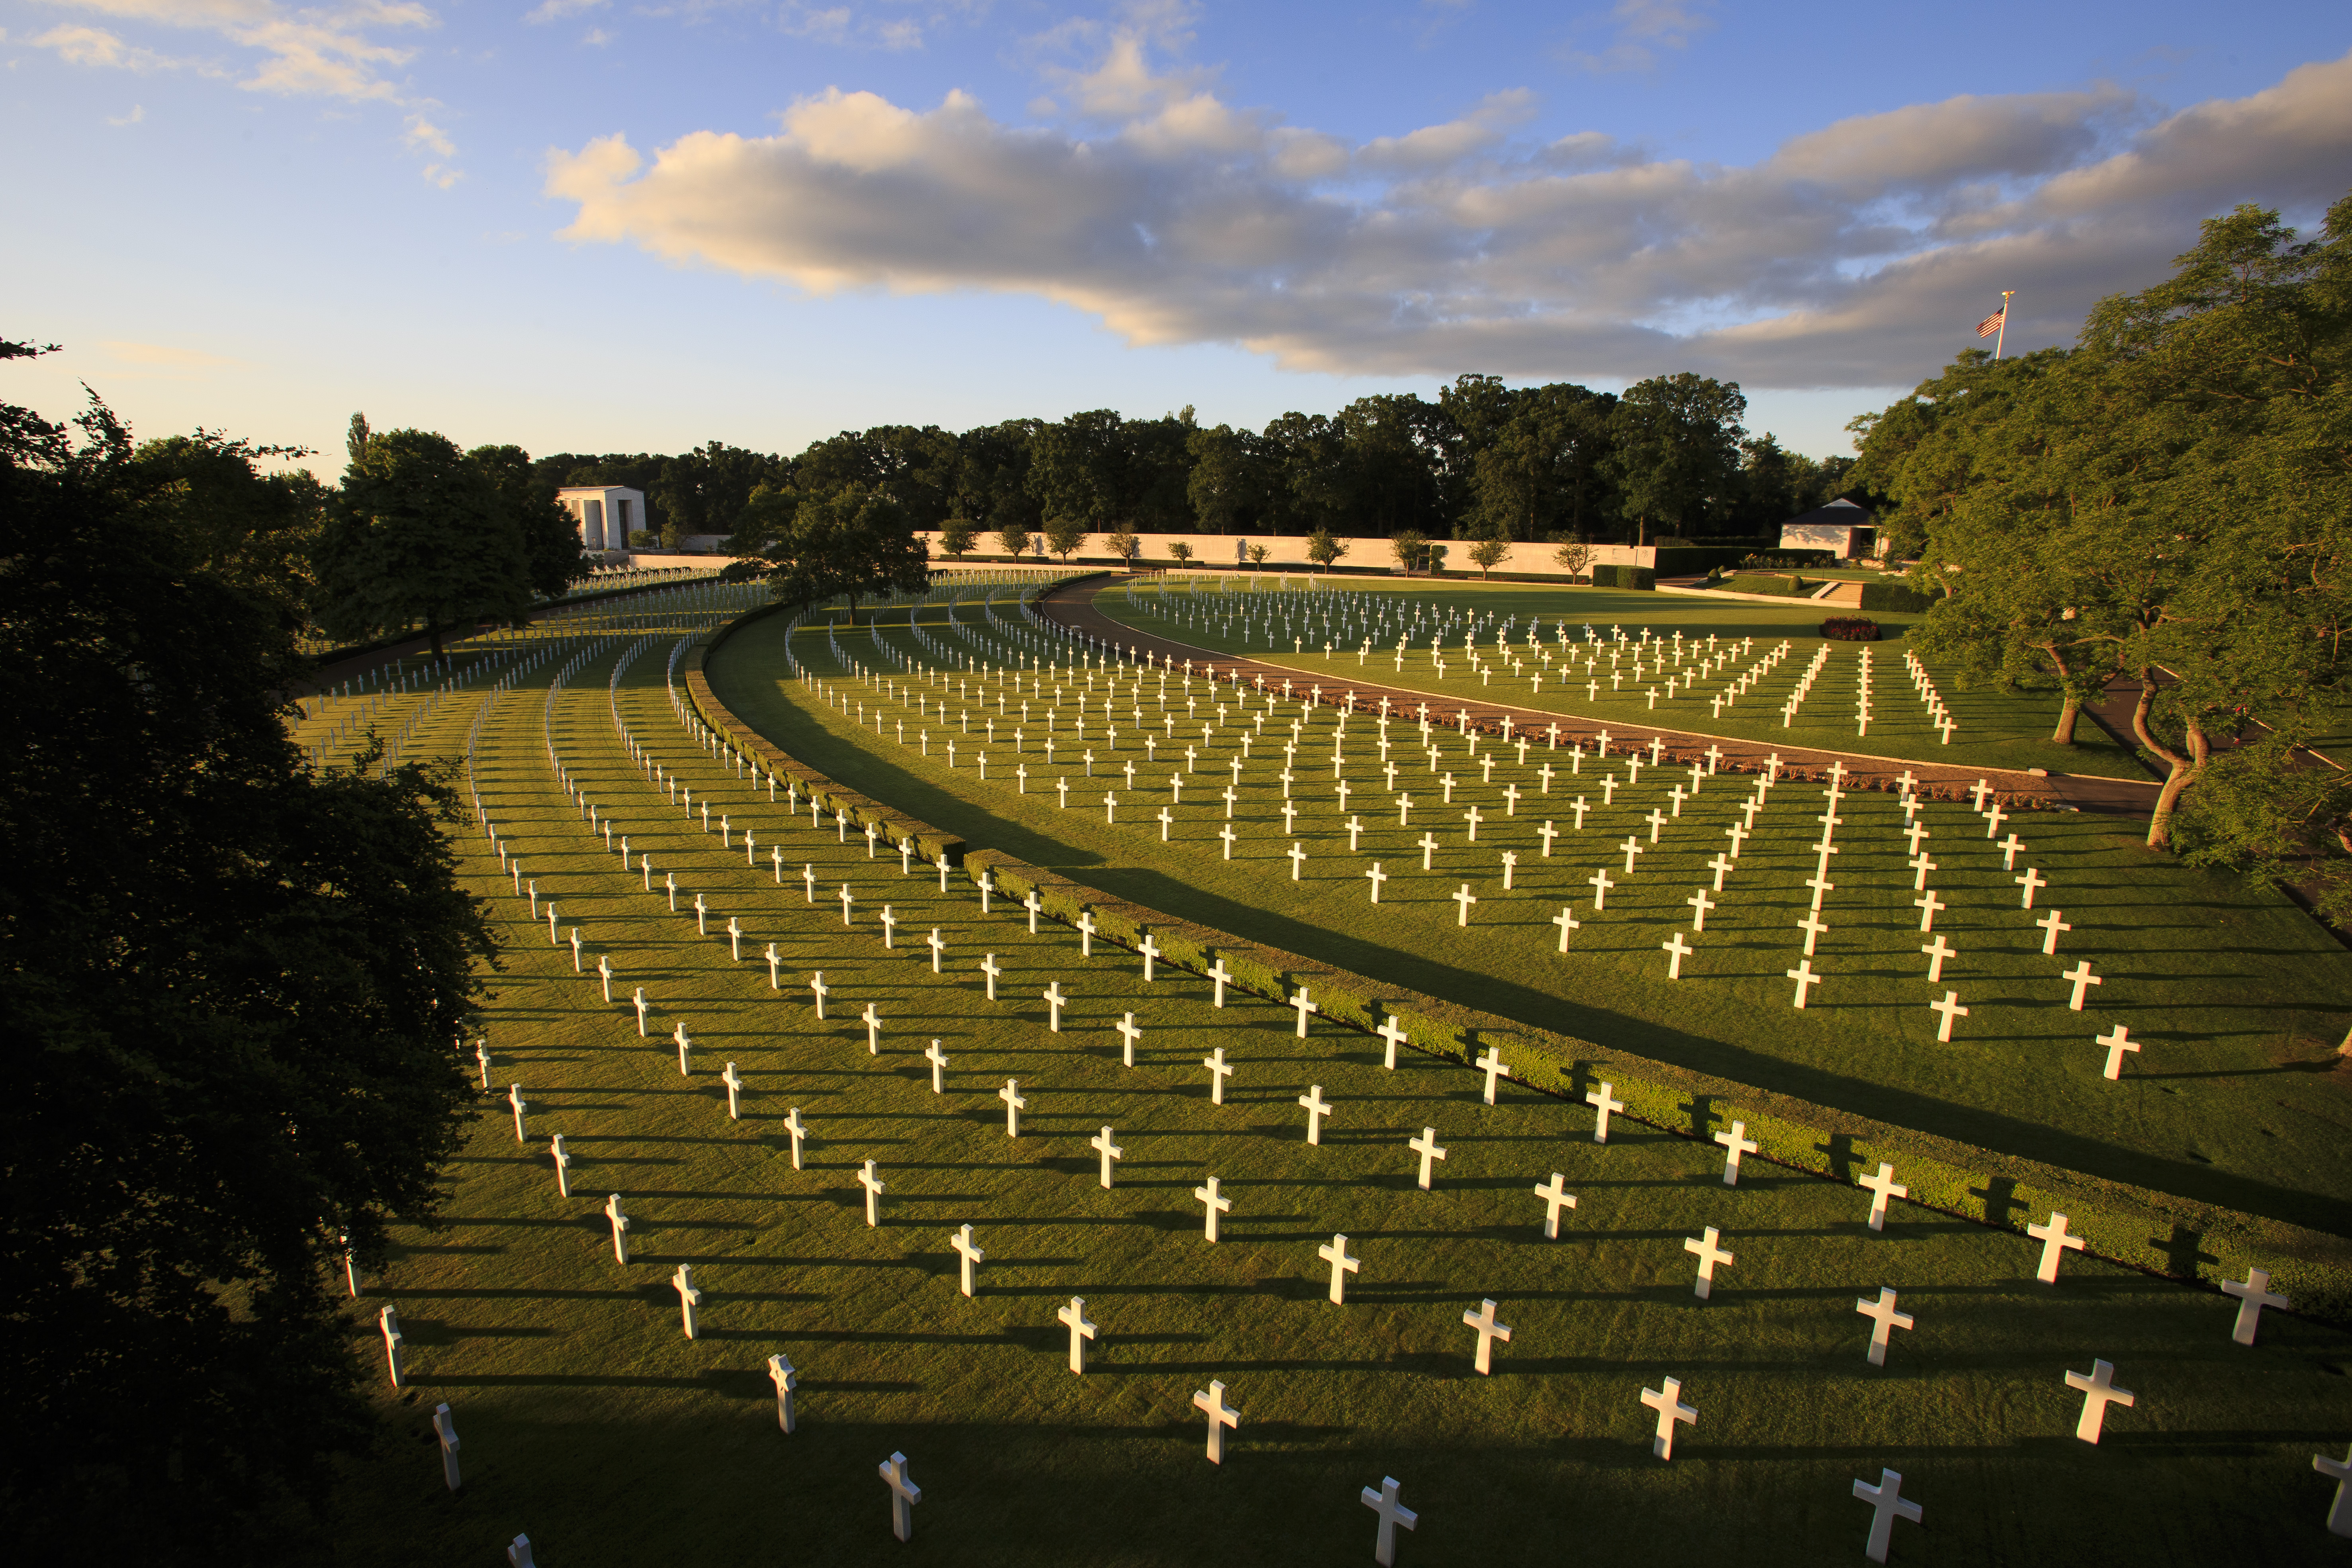 Early morning sun creates shadows for the rows of headstones at Cambridge American Cemetery, June 25, 2014. ABMC photo: Warrick Page